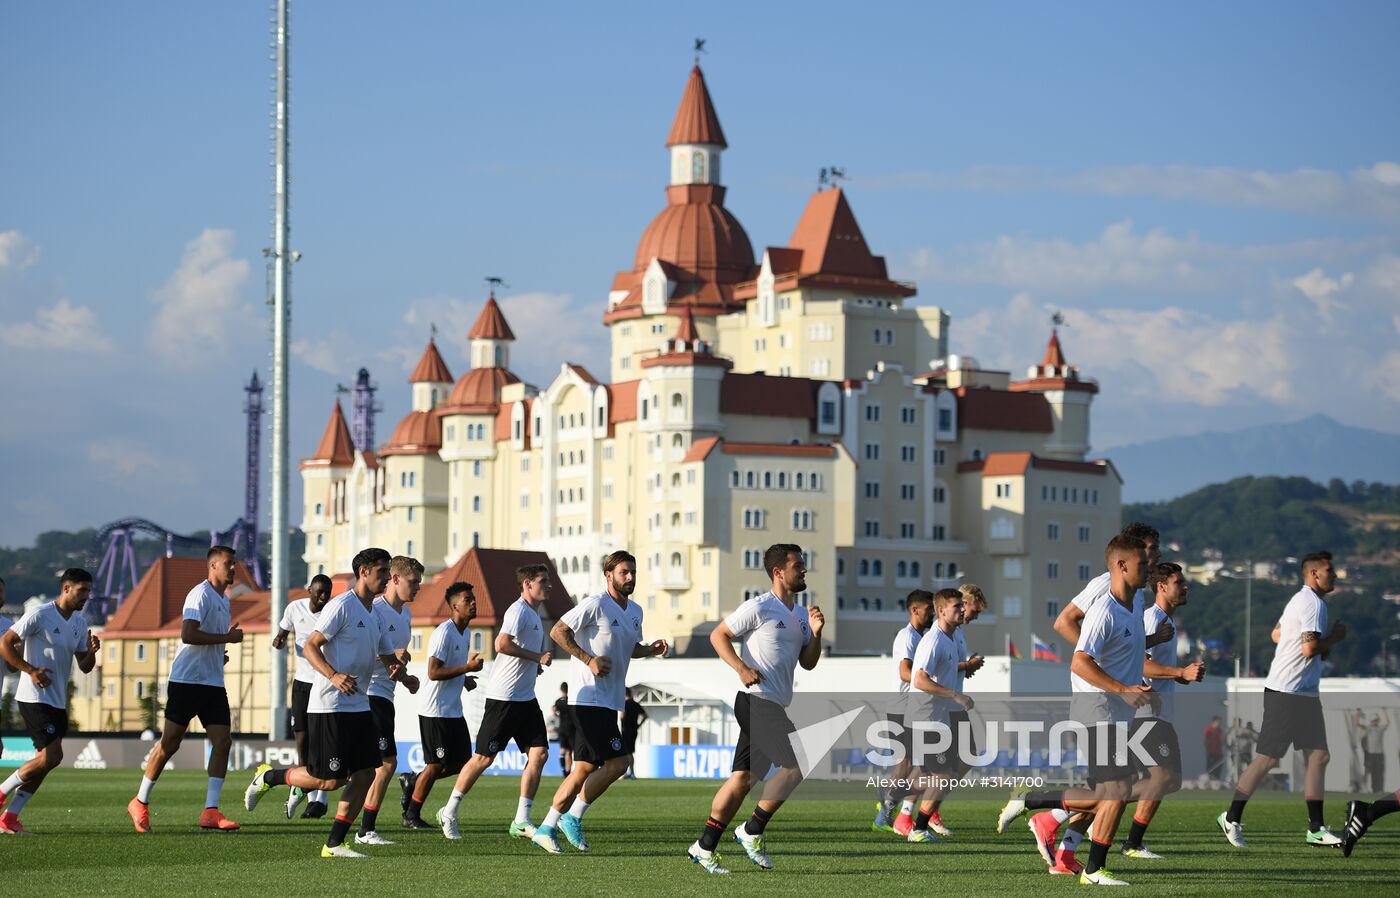 Football. 2017 FIFA Confederations Cup. Training session of Germany's team